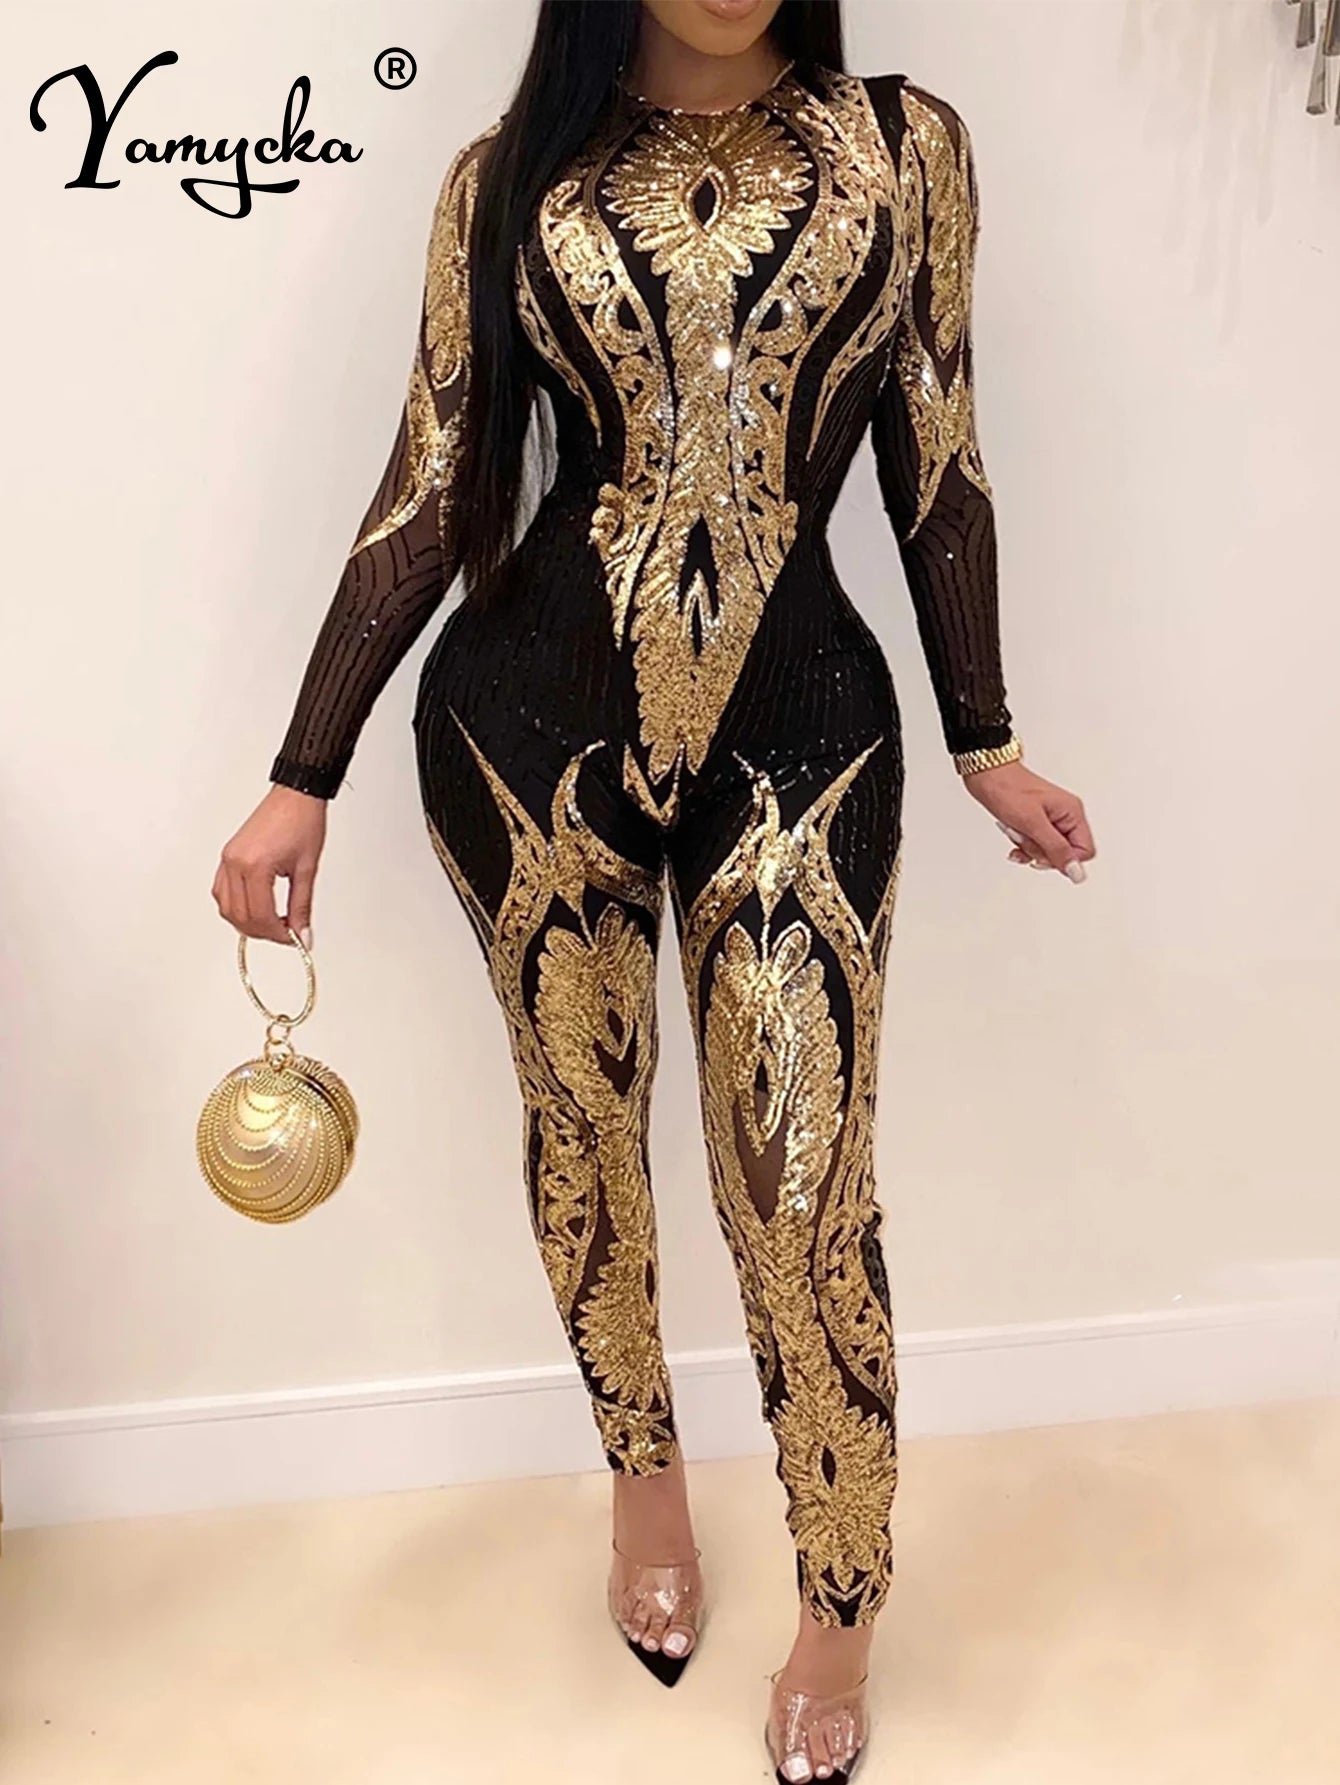 Sparkling Sequin Bodycon Jumpsuit for Women - Nightlife Glamour and Birthday Chic  OurLum.com   